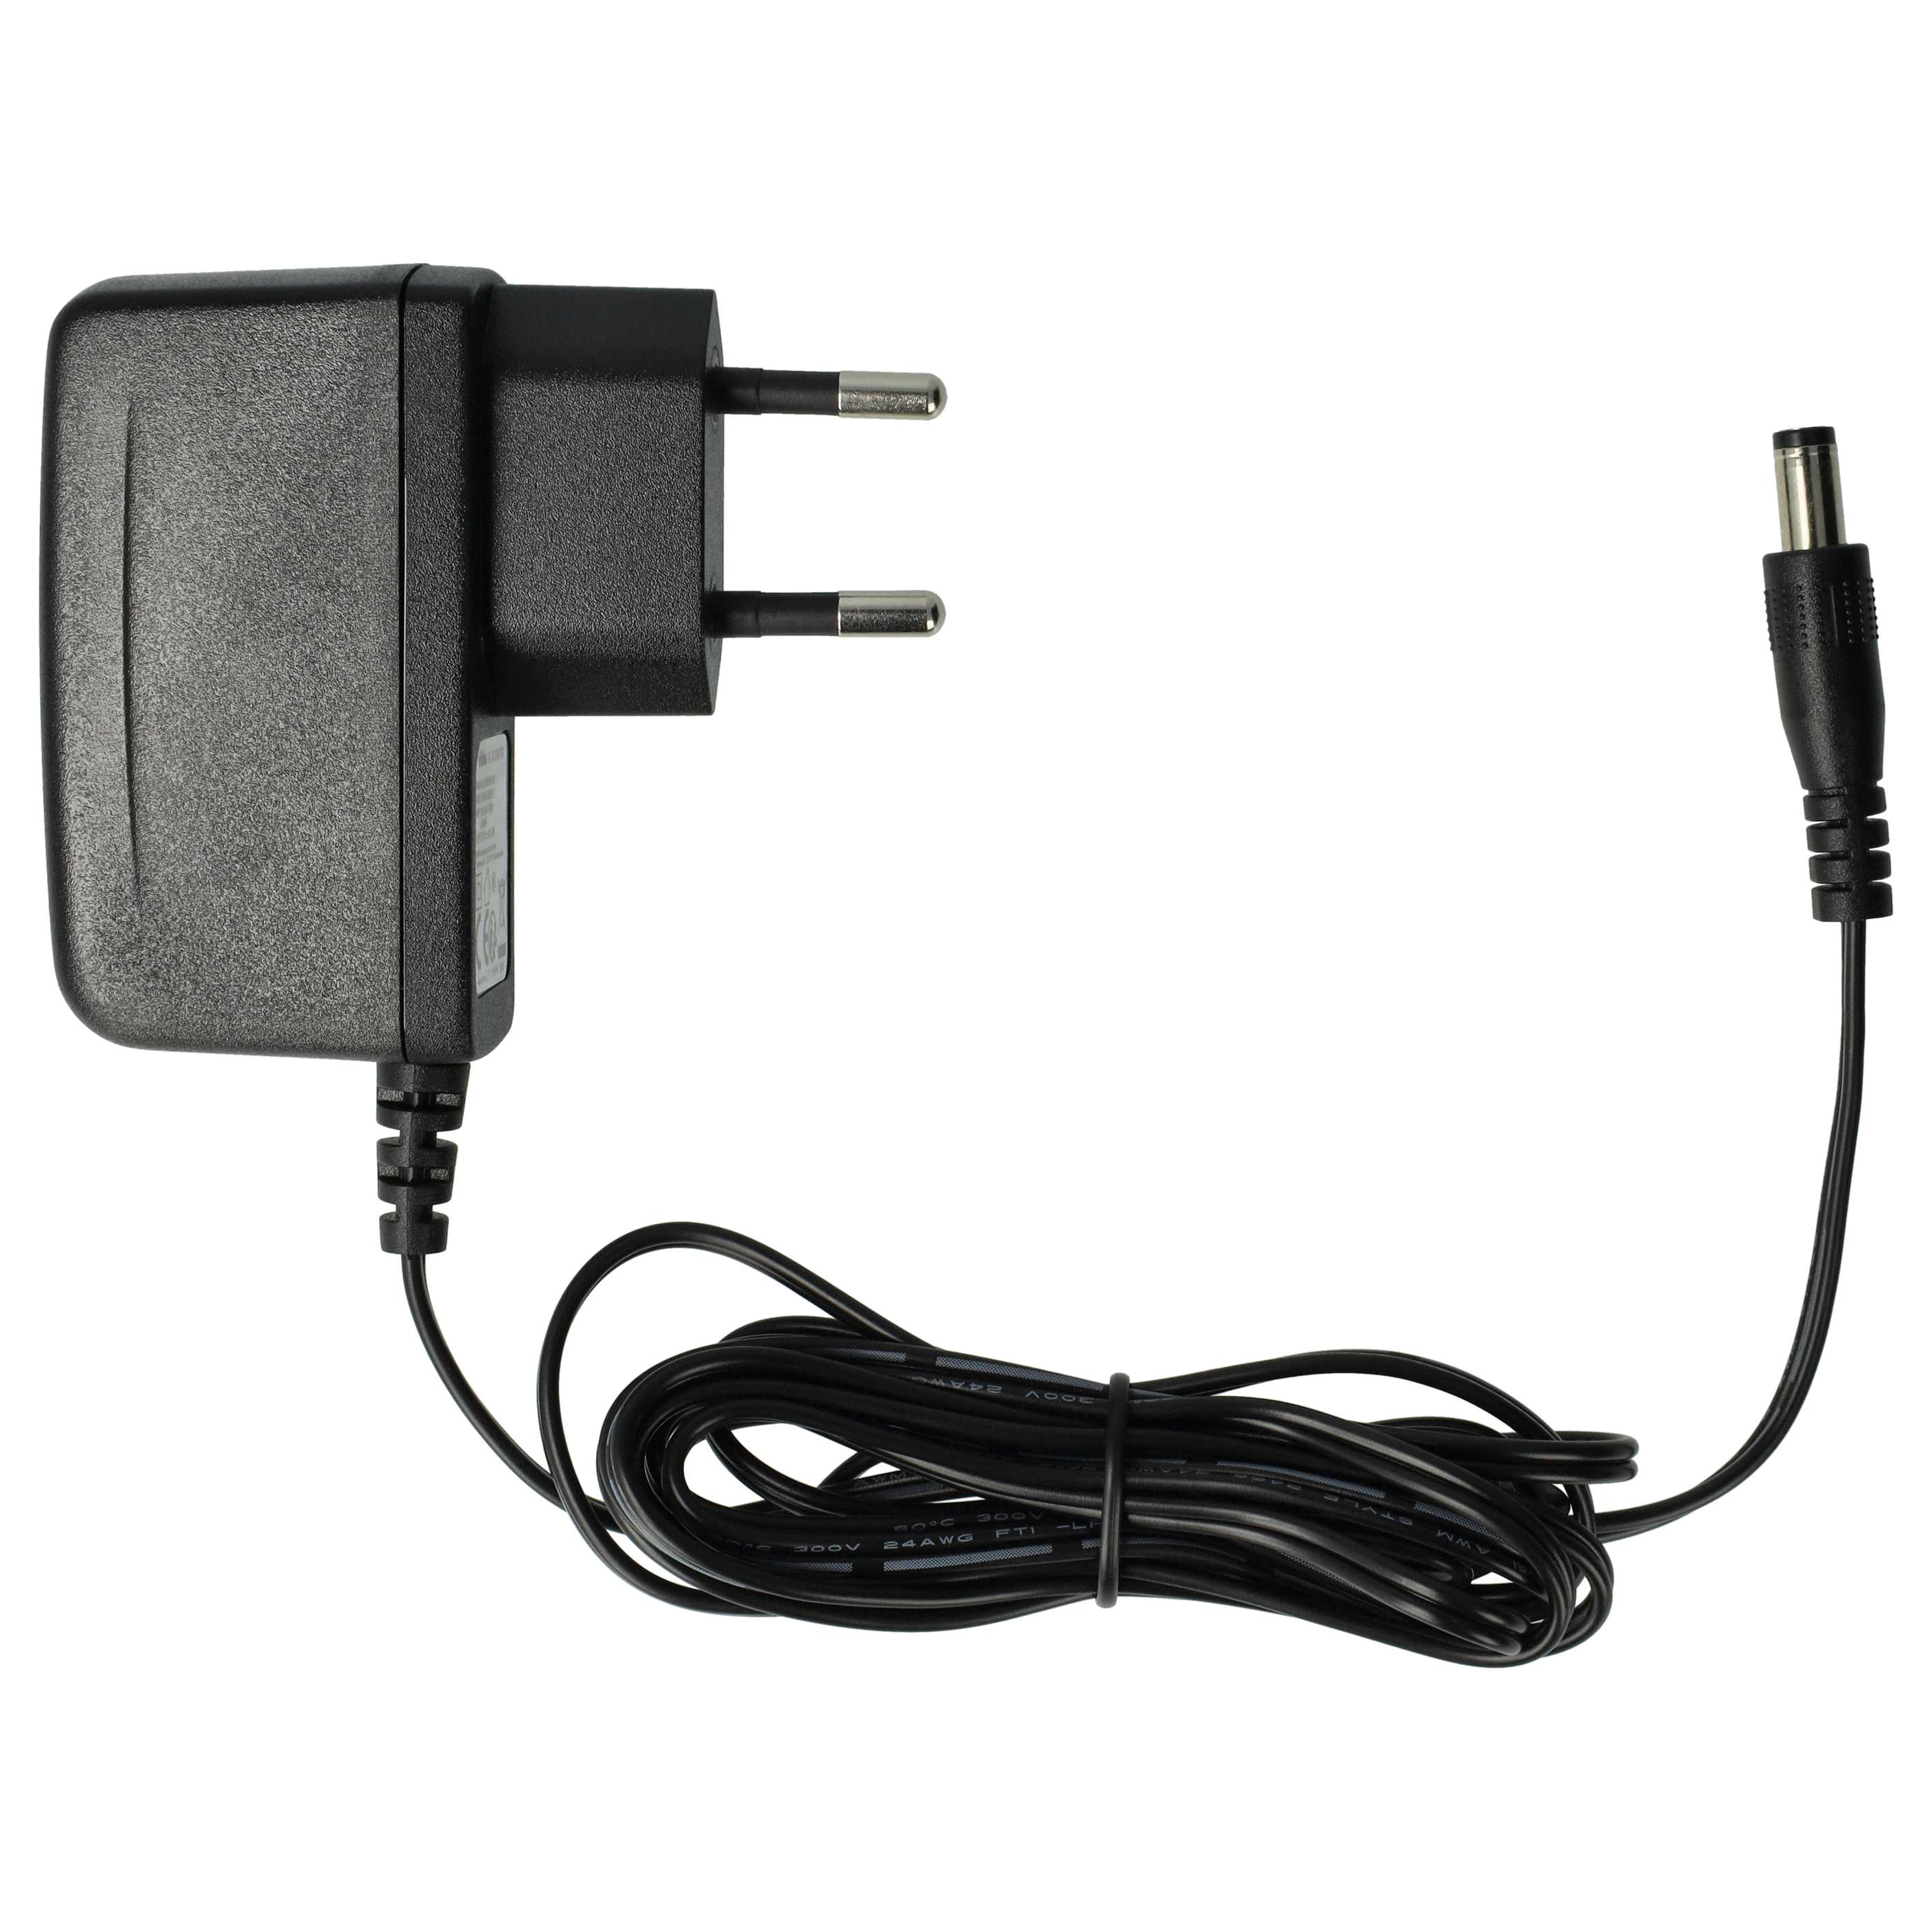 Mains Power Adapter replaces Plantronics 71176-01 for Plantronics Headset Amplifier